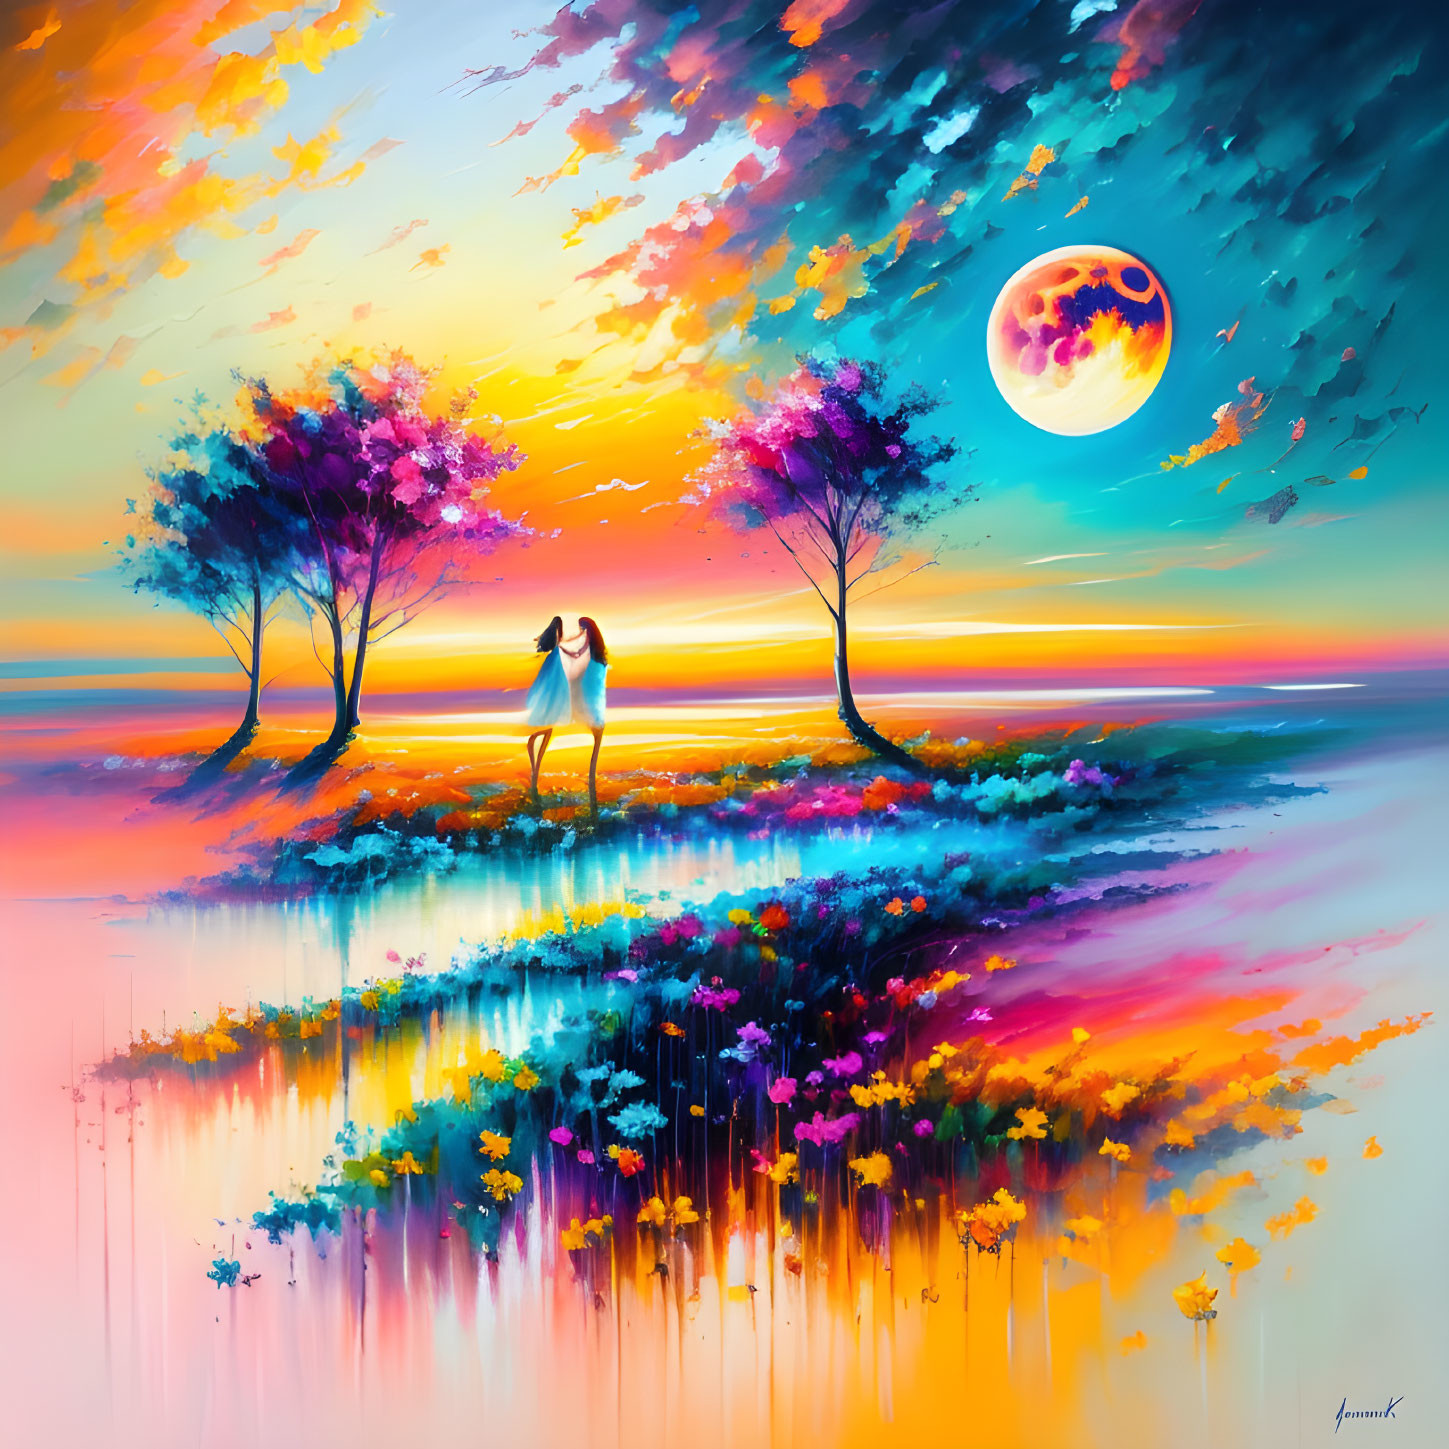 Colorful painting of two figures under tree with vibrant sky, water reflection, flowers, surreal moon